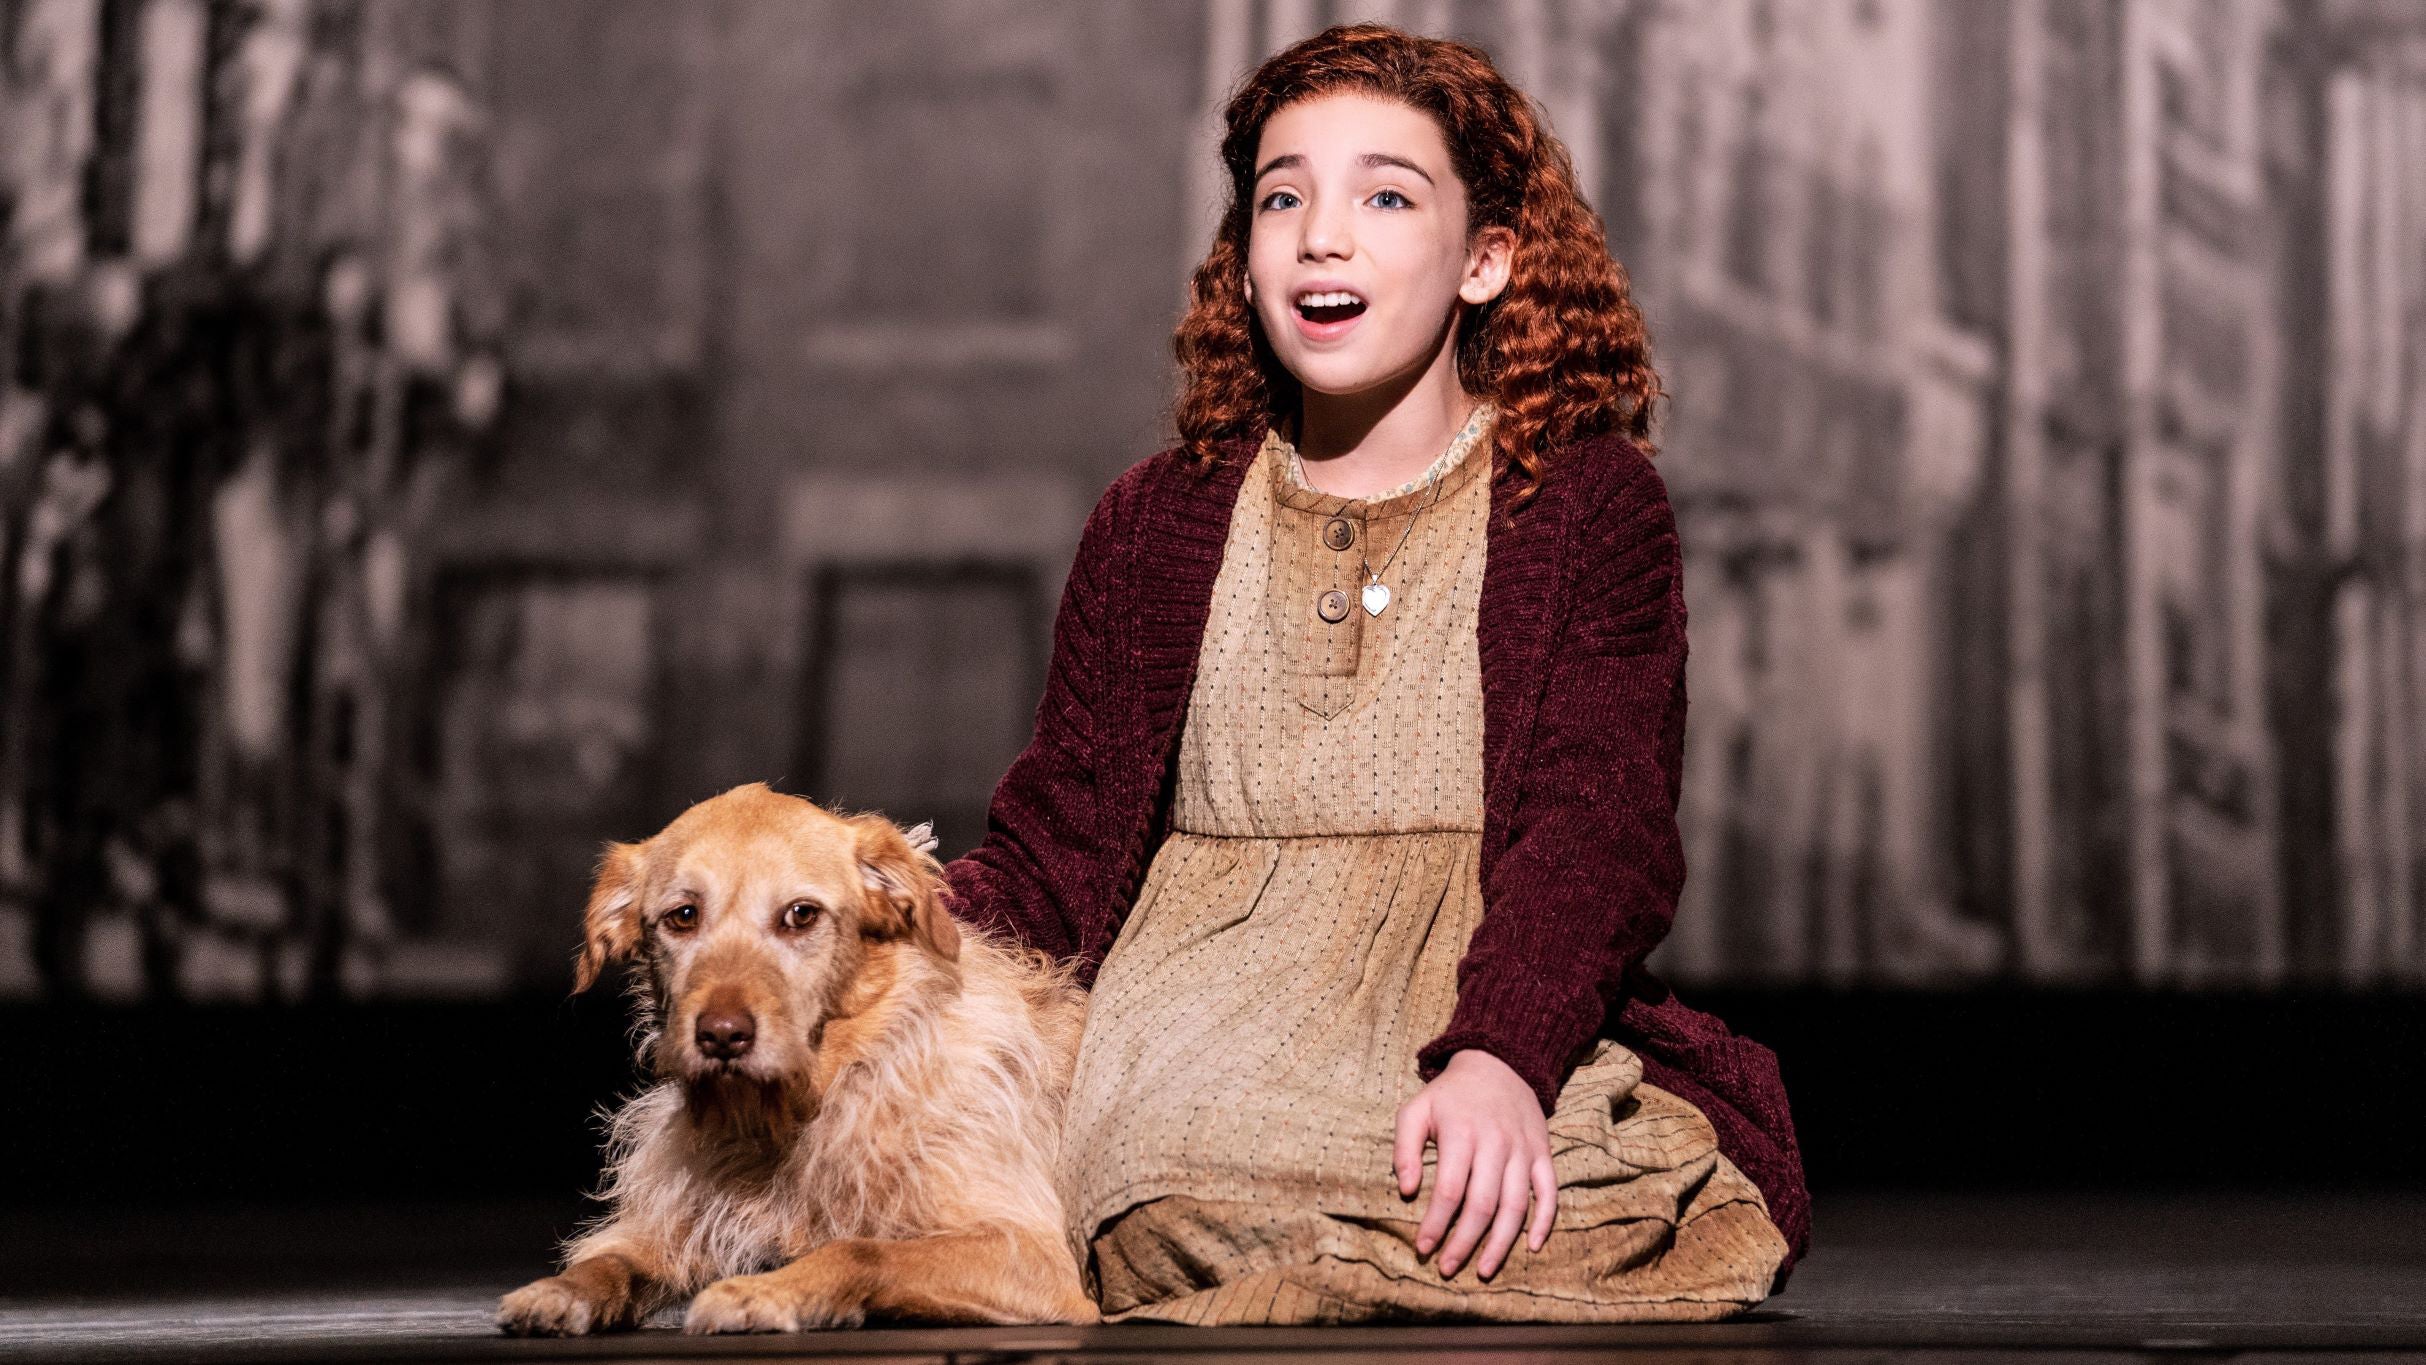 Annie in Boston promo photo for Official Platinum presale offer code